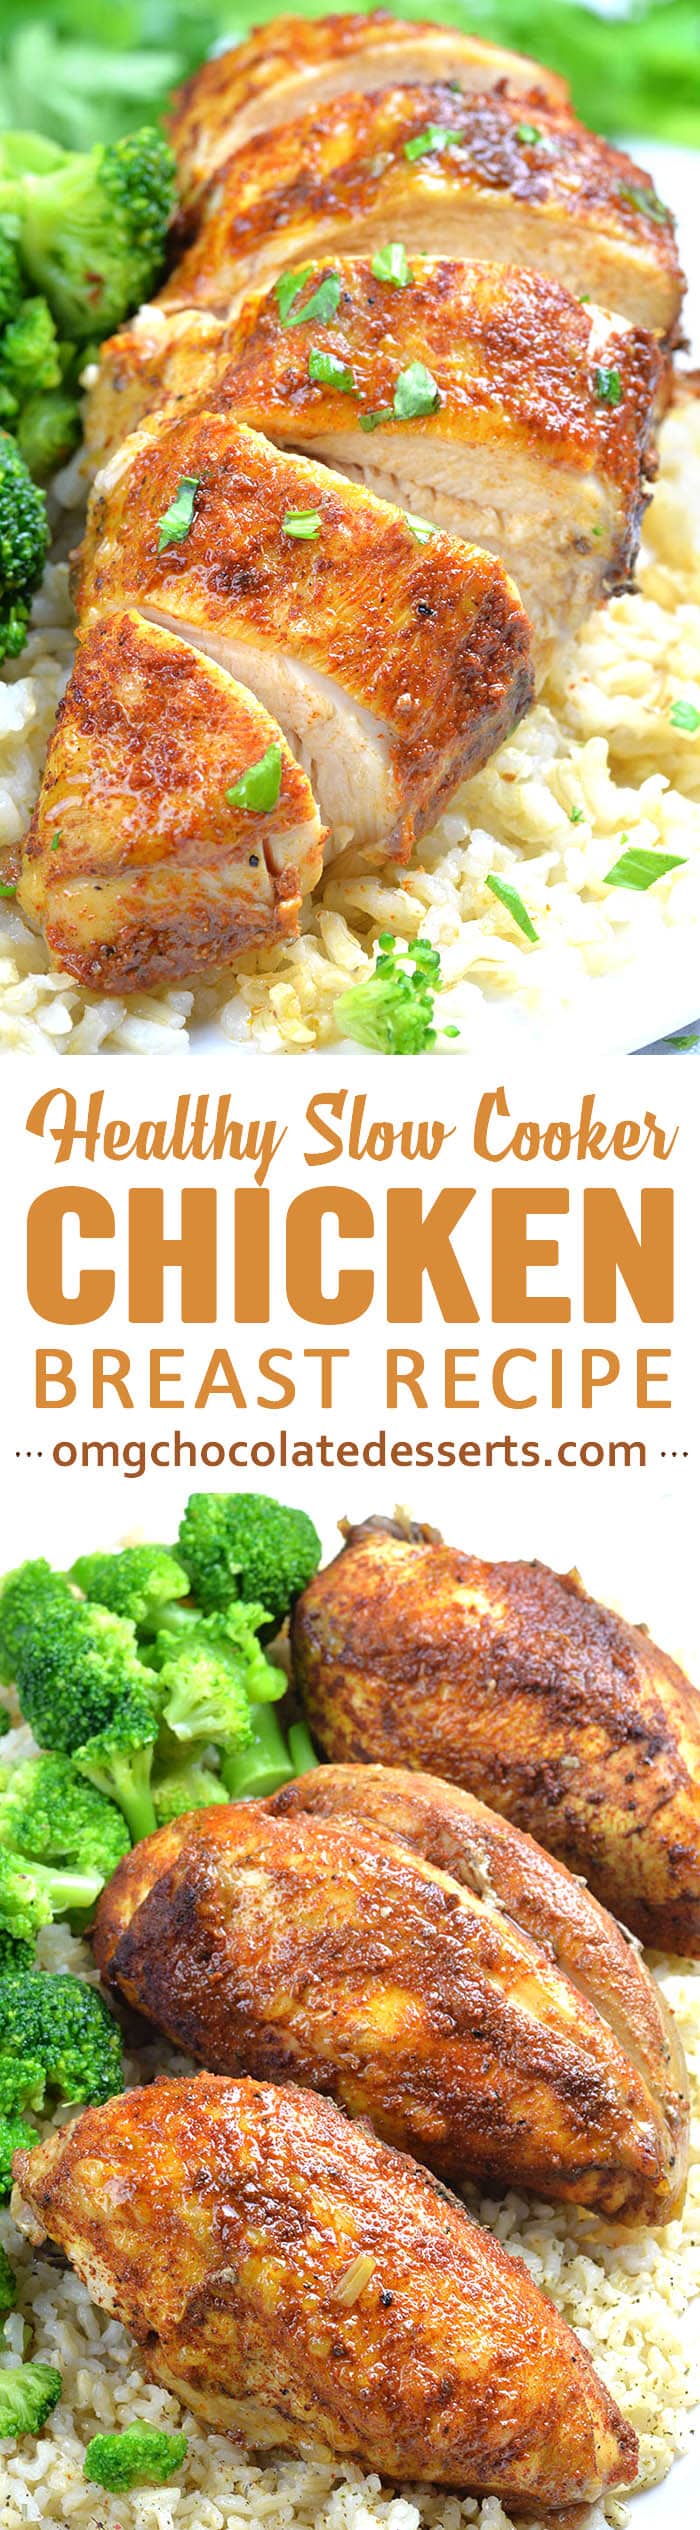 Healthy Slow Cooker Chicken Breast Recipe - juicy, crockpot chicken breast served with broccoli and rice is my favorite HEALTHY and family approved DINNER recipe.